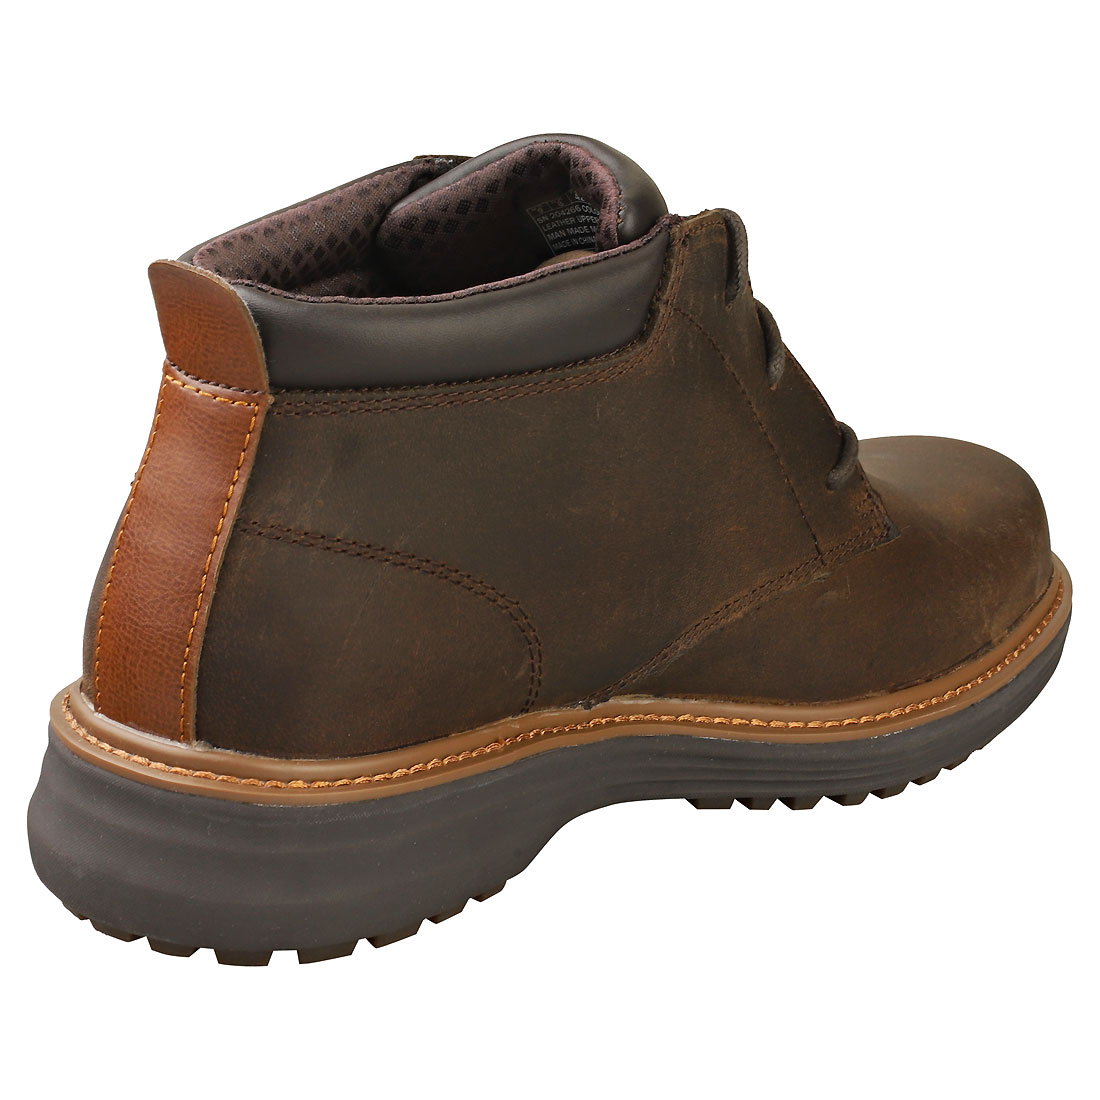 SKECHERS WENSON OSTENO Mens Chocolate Casual Boots - 9 UK £68.00 ...